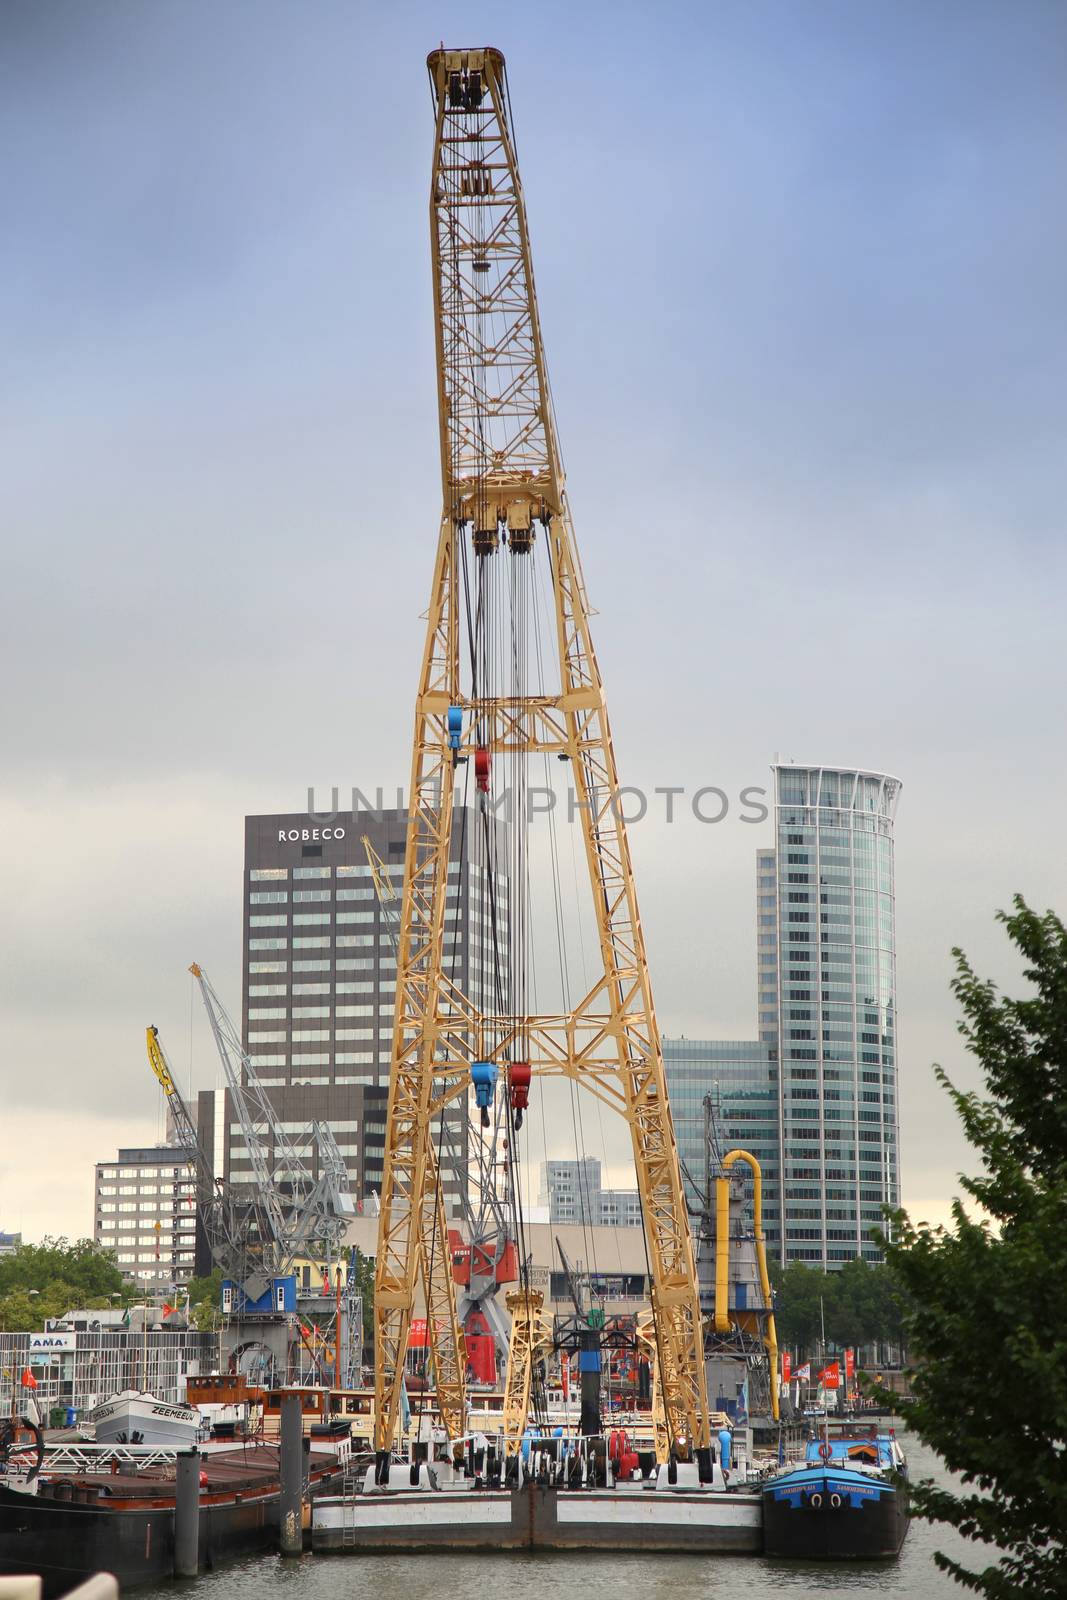 ROTTERDAM, THE NETHERLANDS - 18 AUGUST: Old cranes in Historical by vladacanon